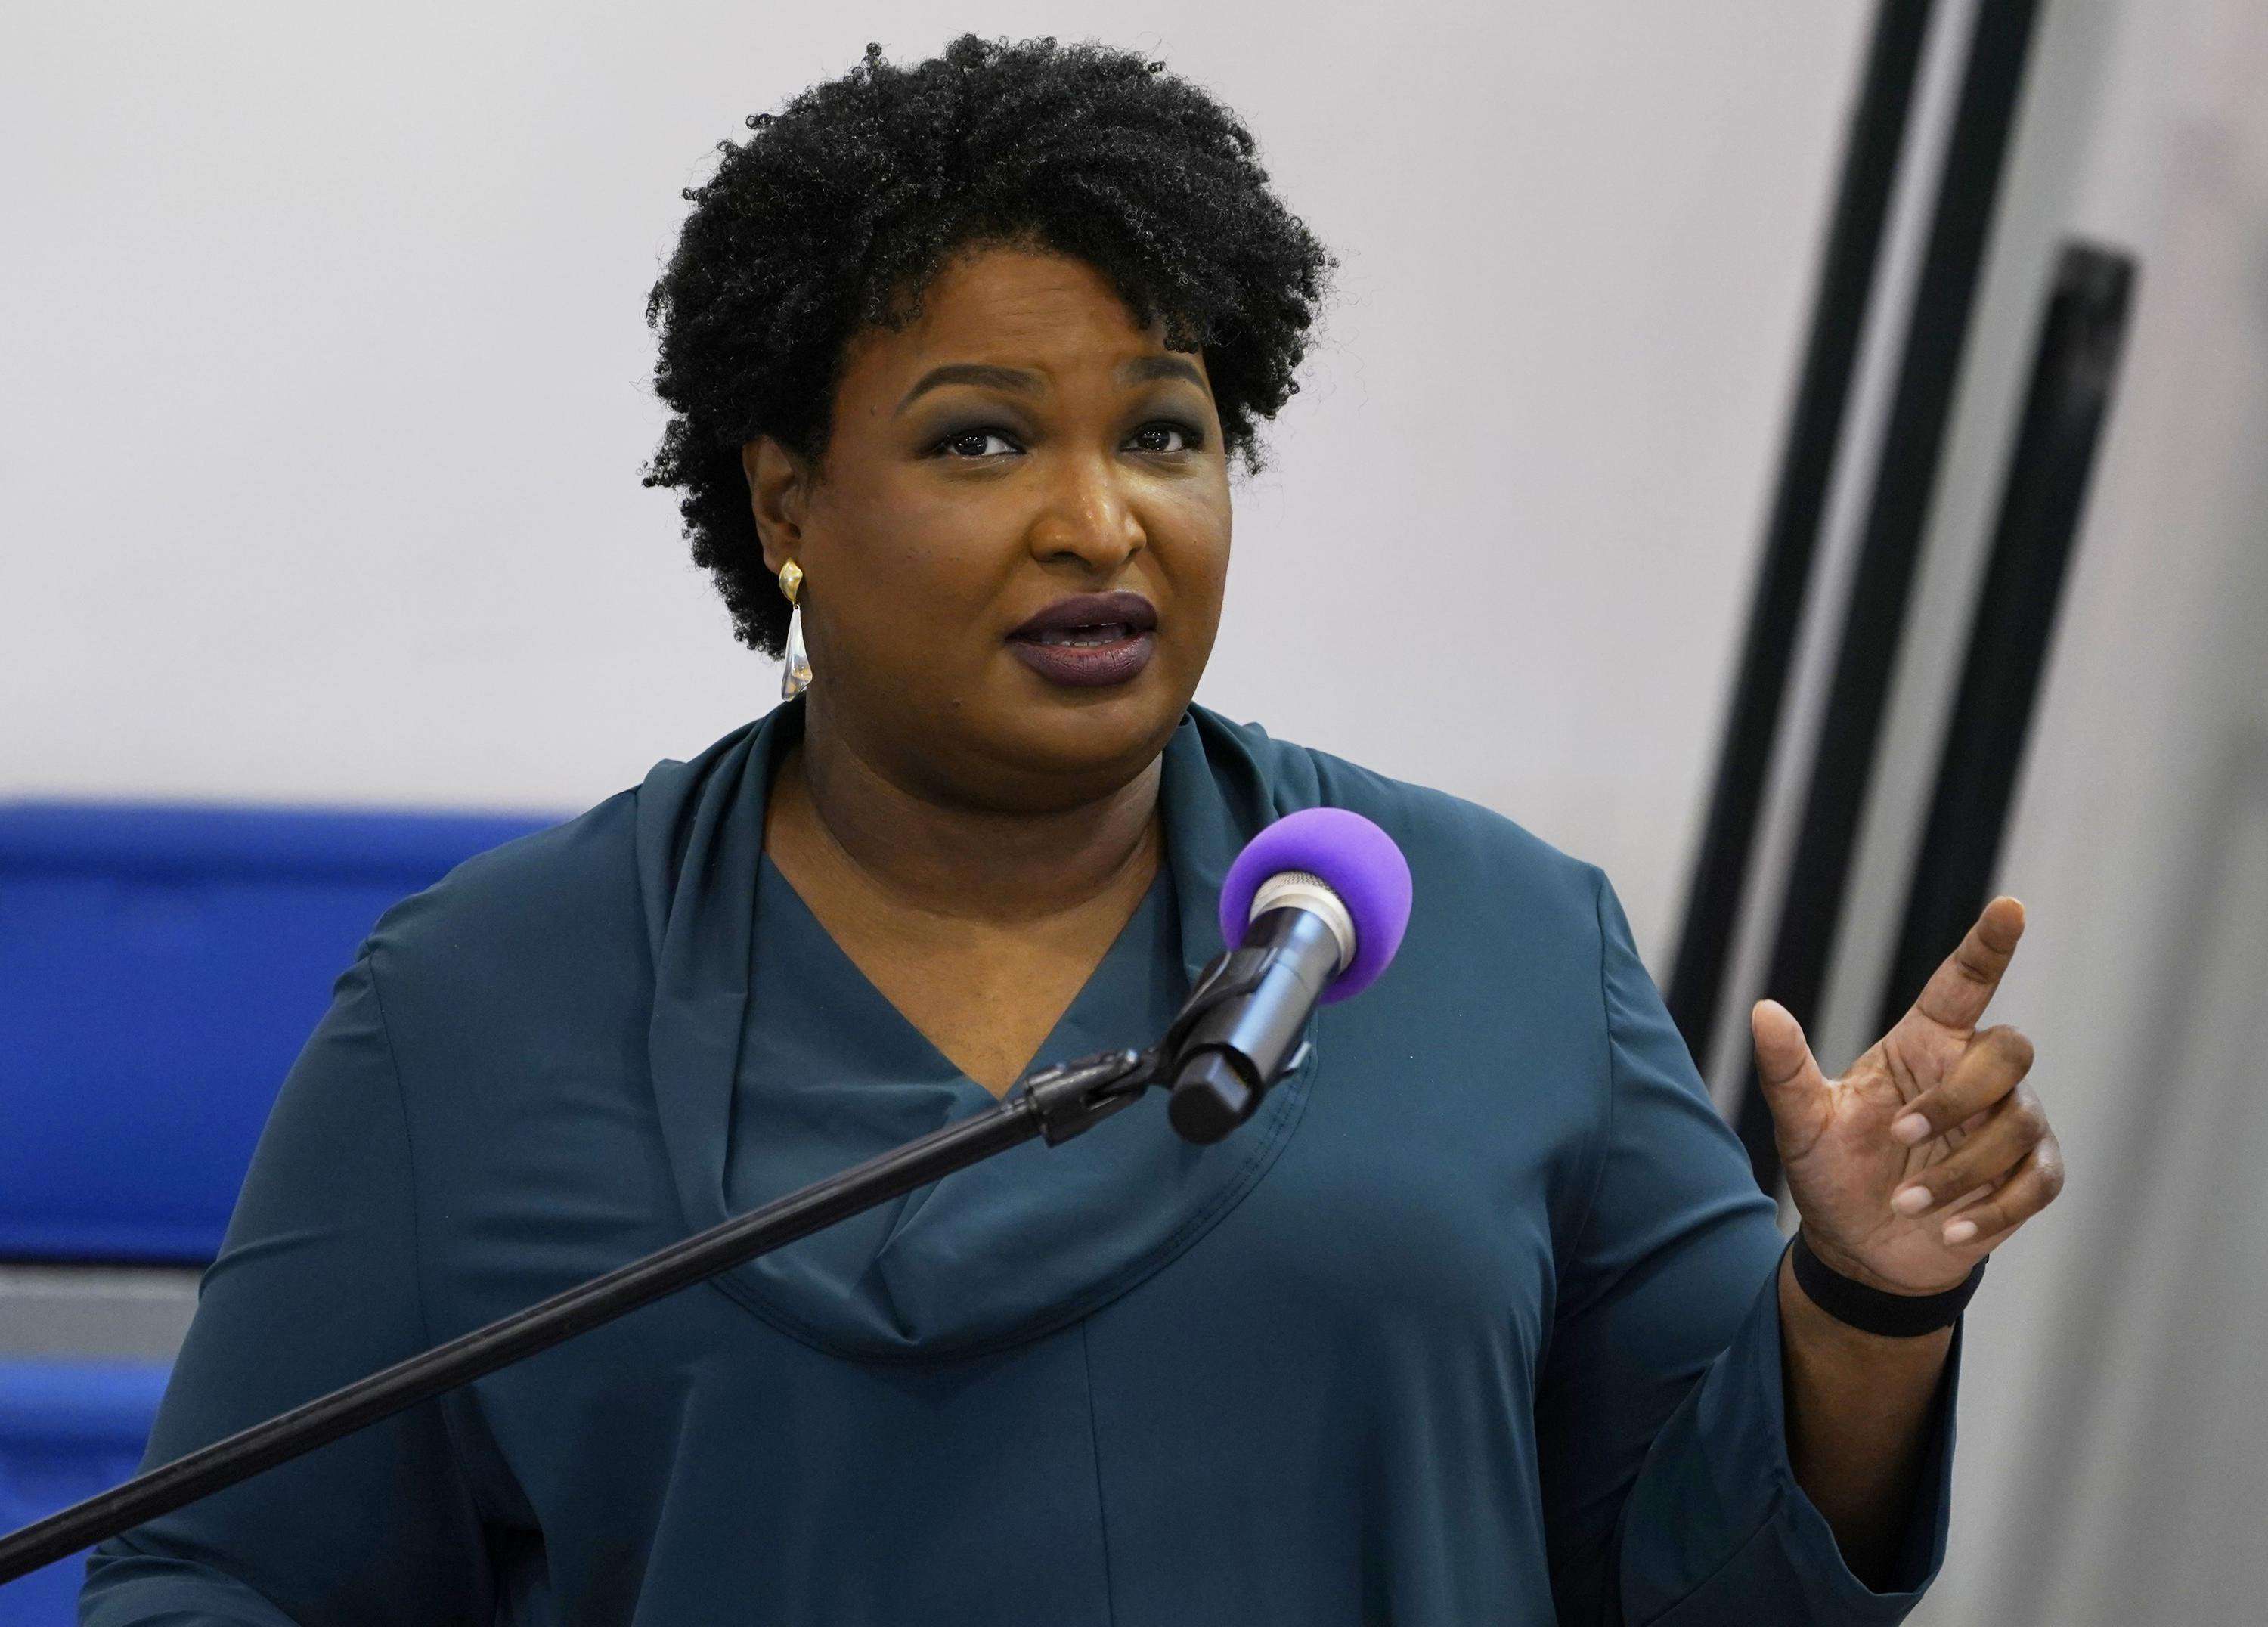 image for Stacey Abrams group donates $1.34M to wipe out medical debts